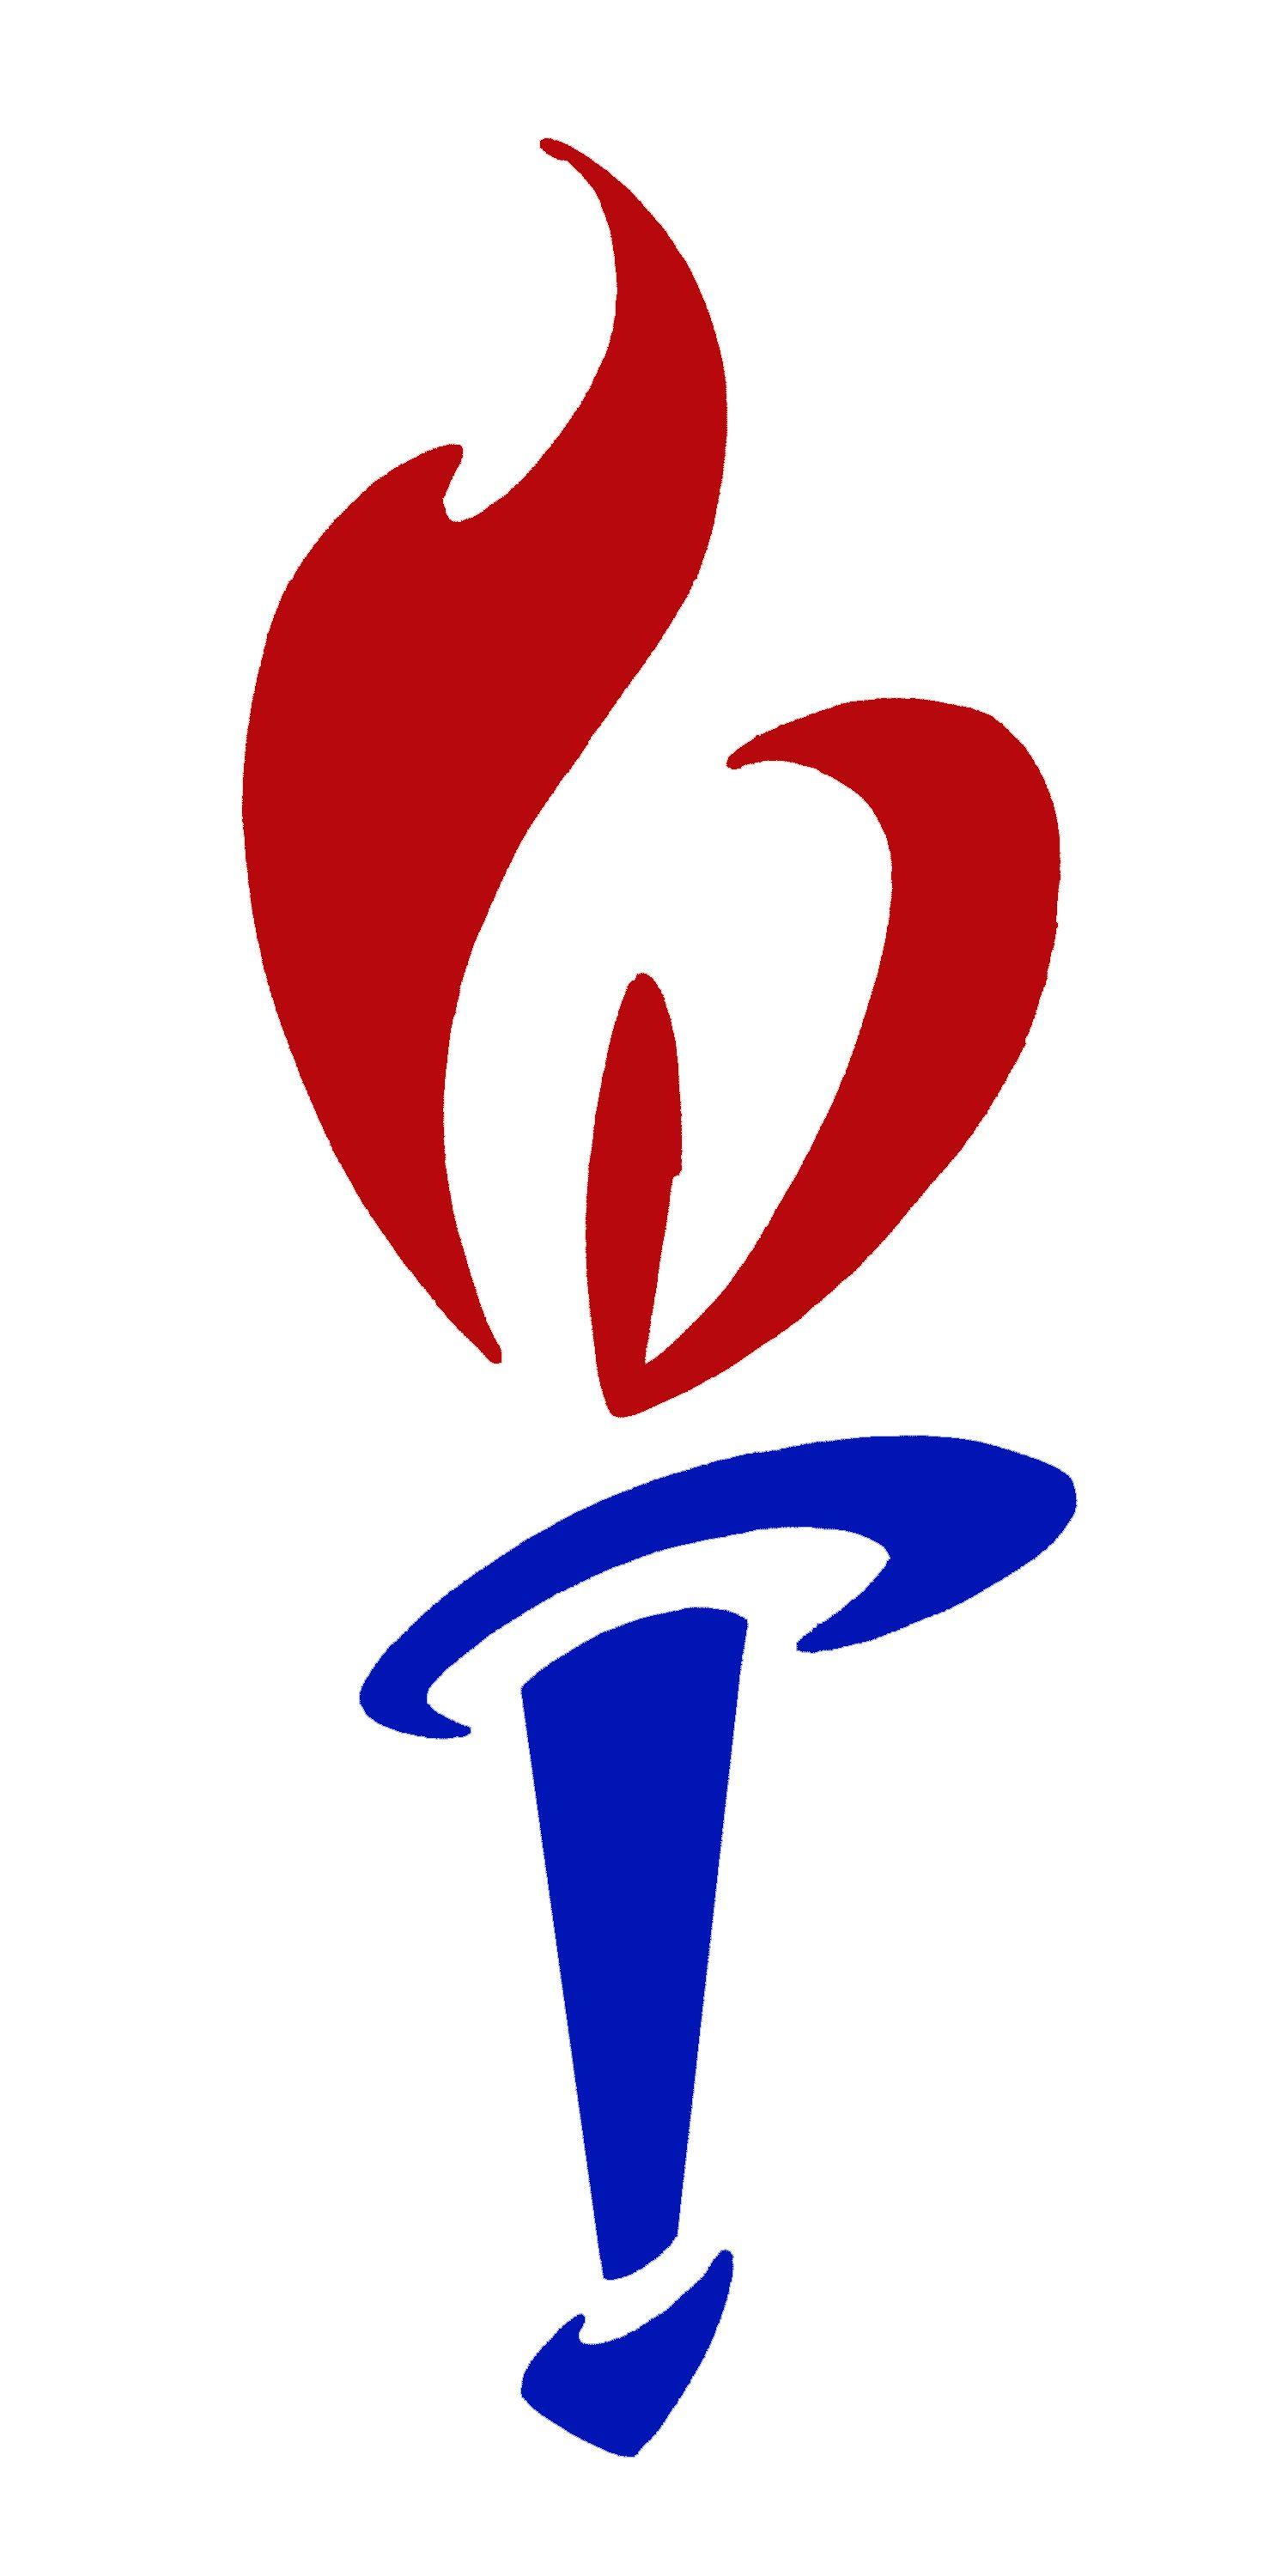 Red and Blue Torch Logo - Camp Champions summer, the boys' side debuted